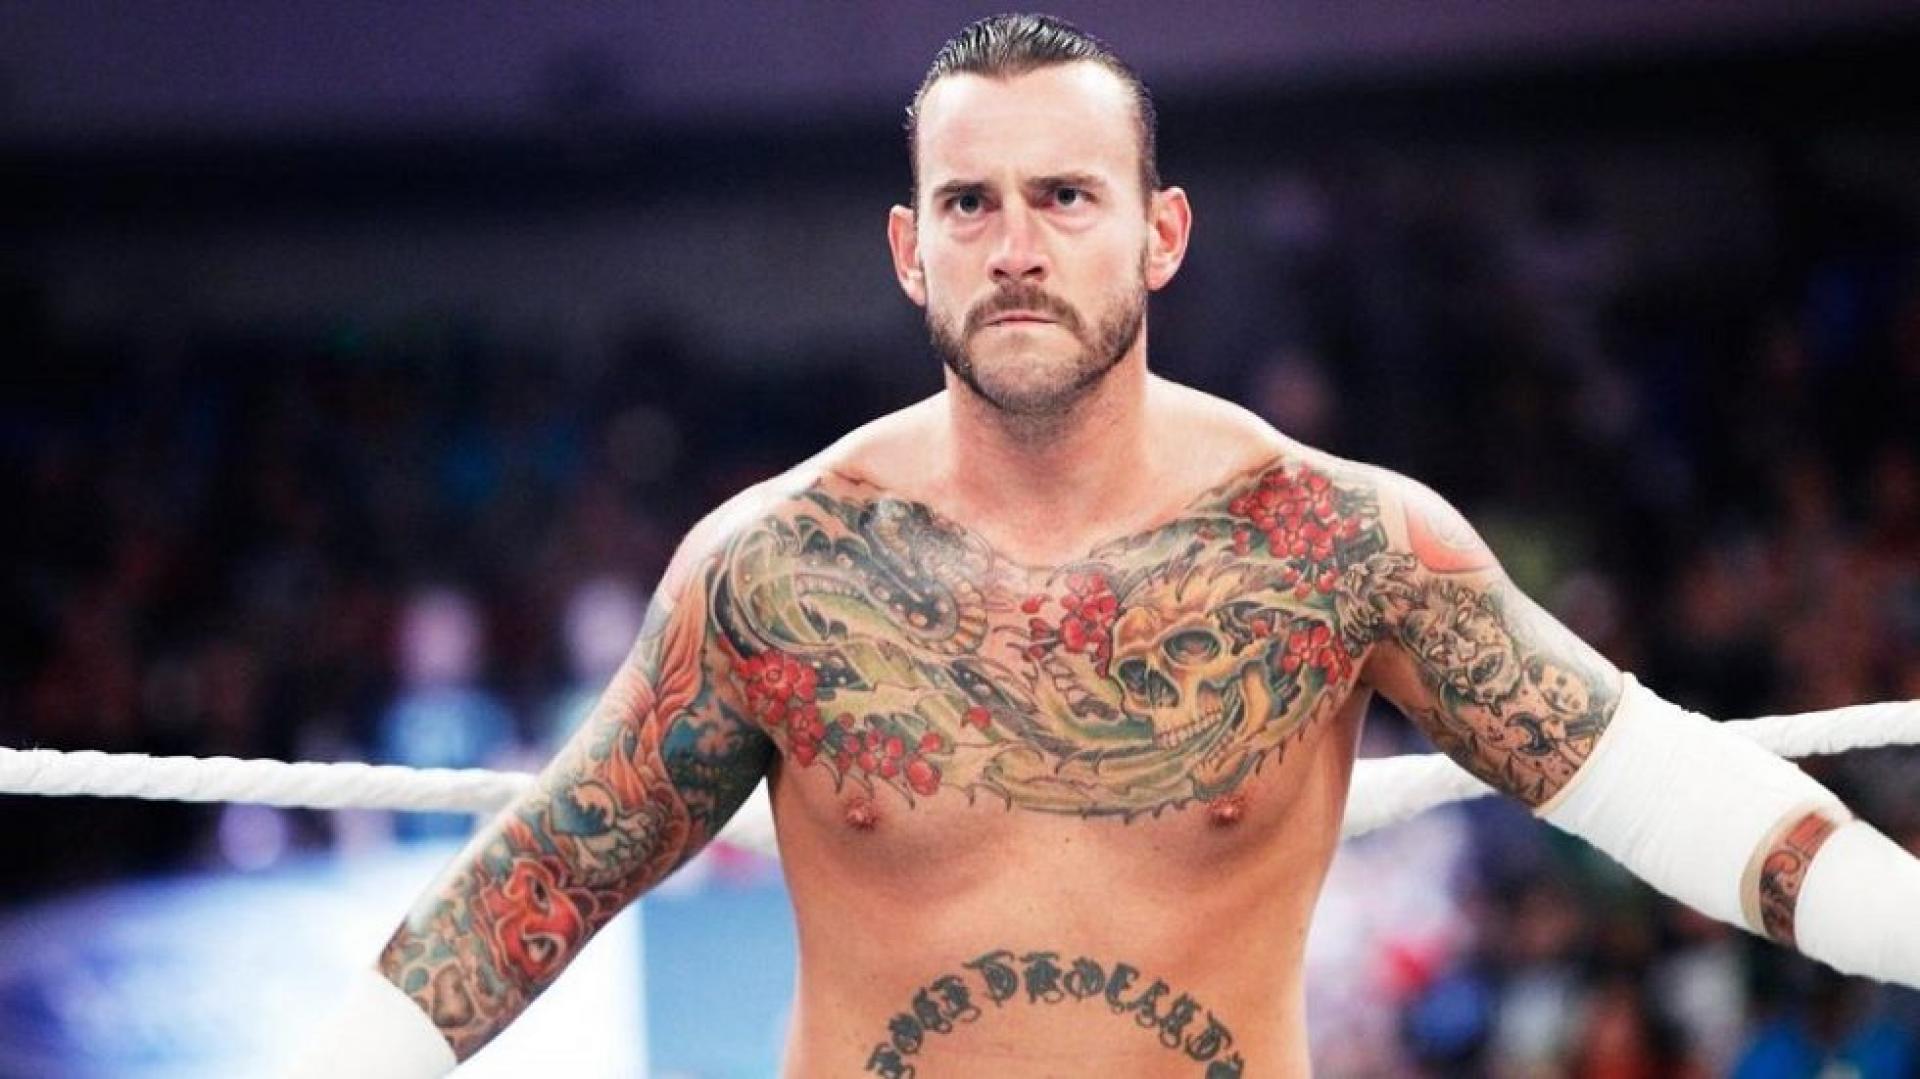 Wwes Tv Network Partners Are Said To Be Shocked About Cm Punk Signing